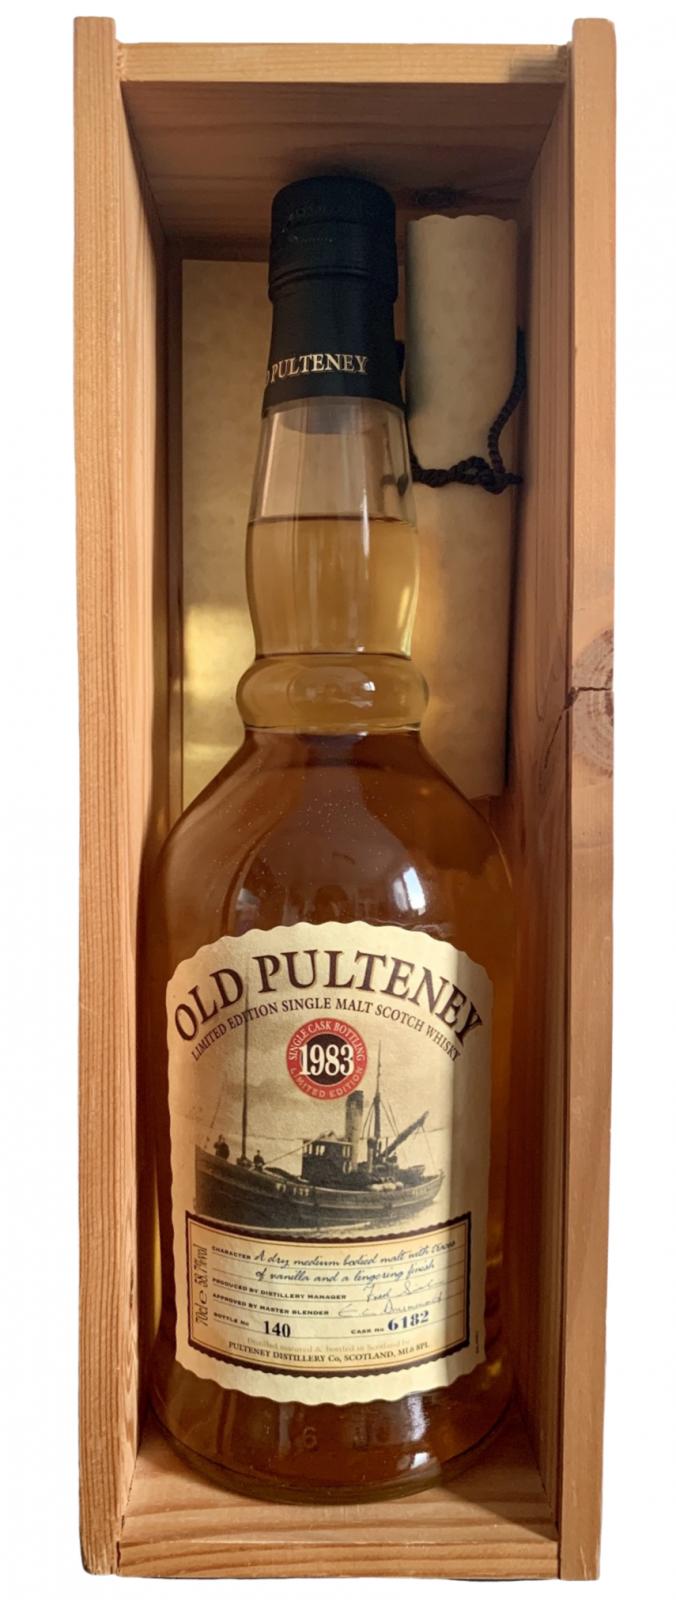 Old Pulteney 1983 - Ratings and reviews - Whiskybase